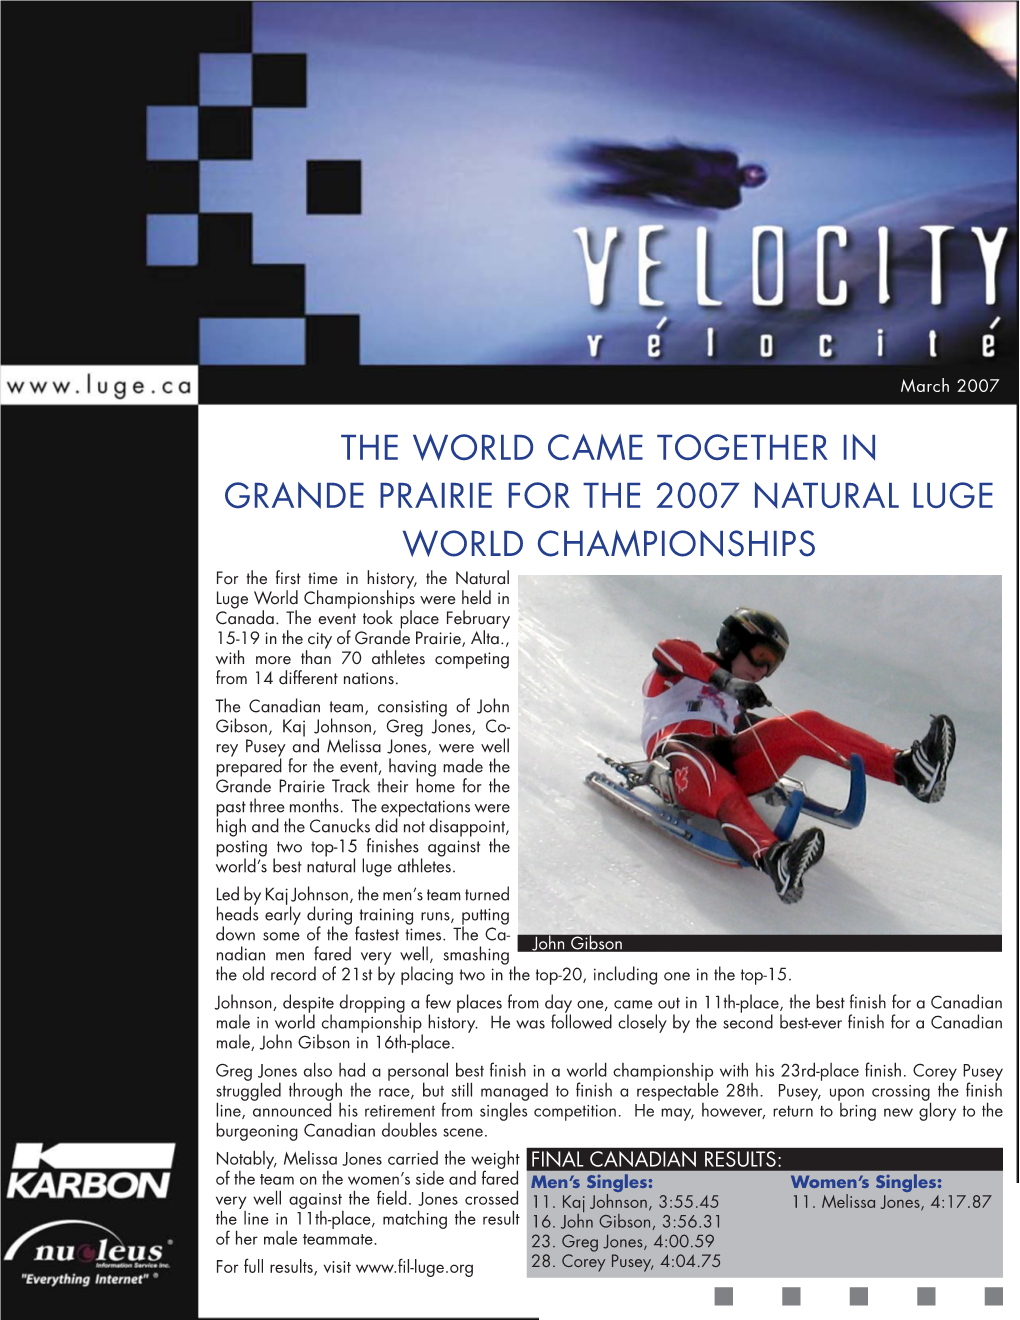 The World Came Together in Grande Prairie for the 2007 Natural Luge